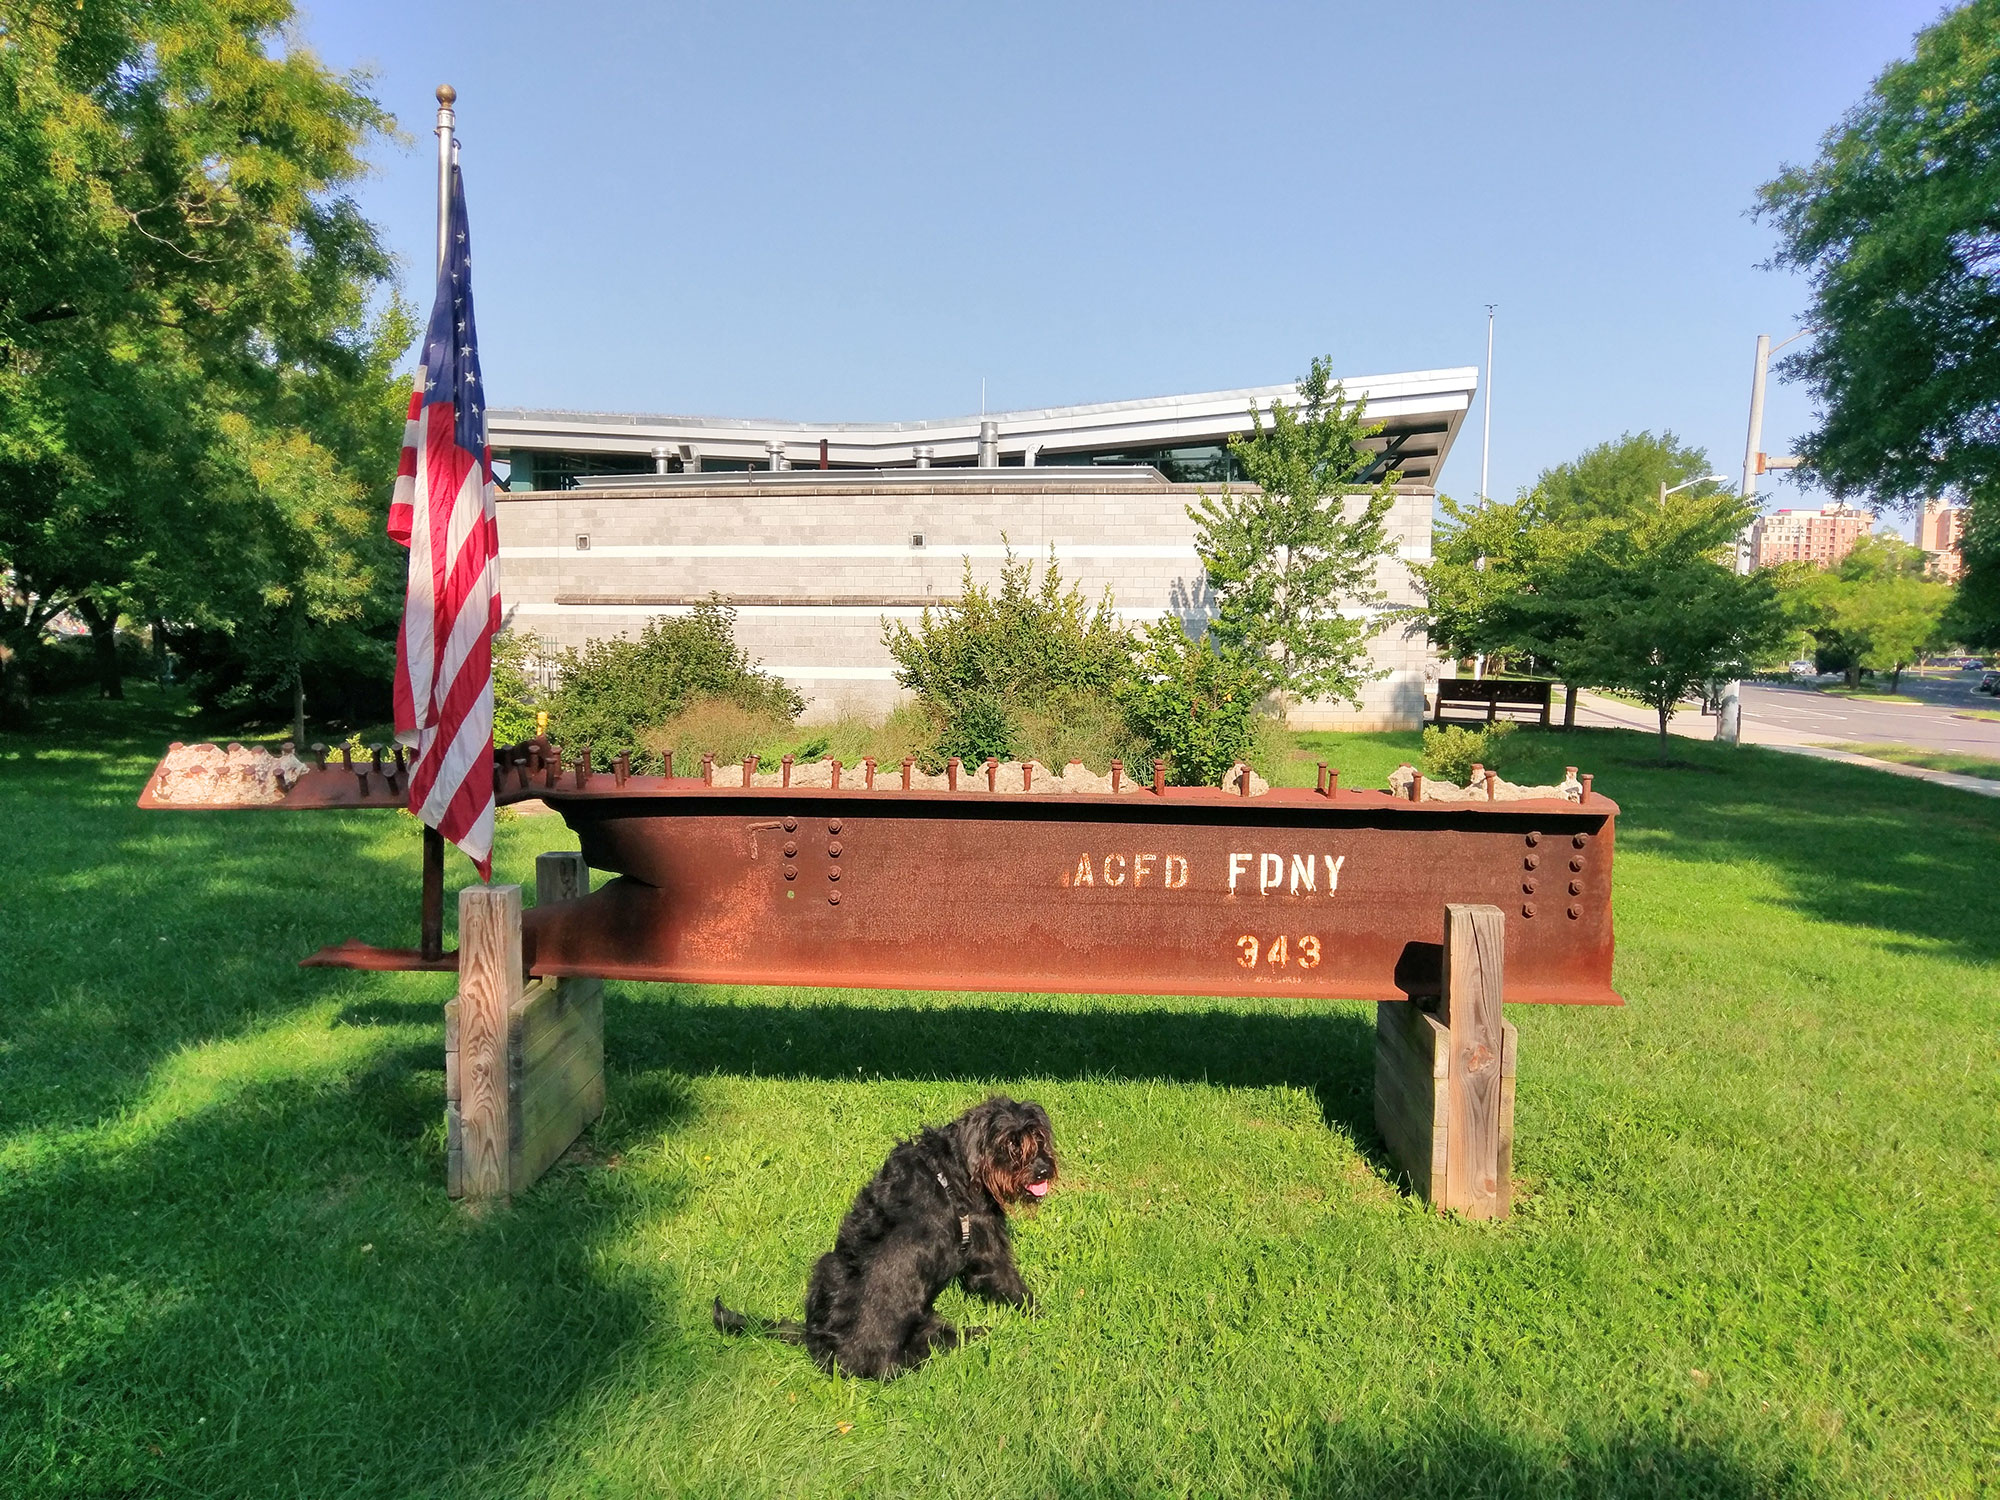 The Pentagon City fire station and 9/11 memorial.